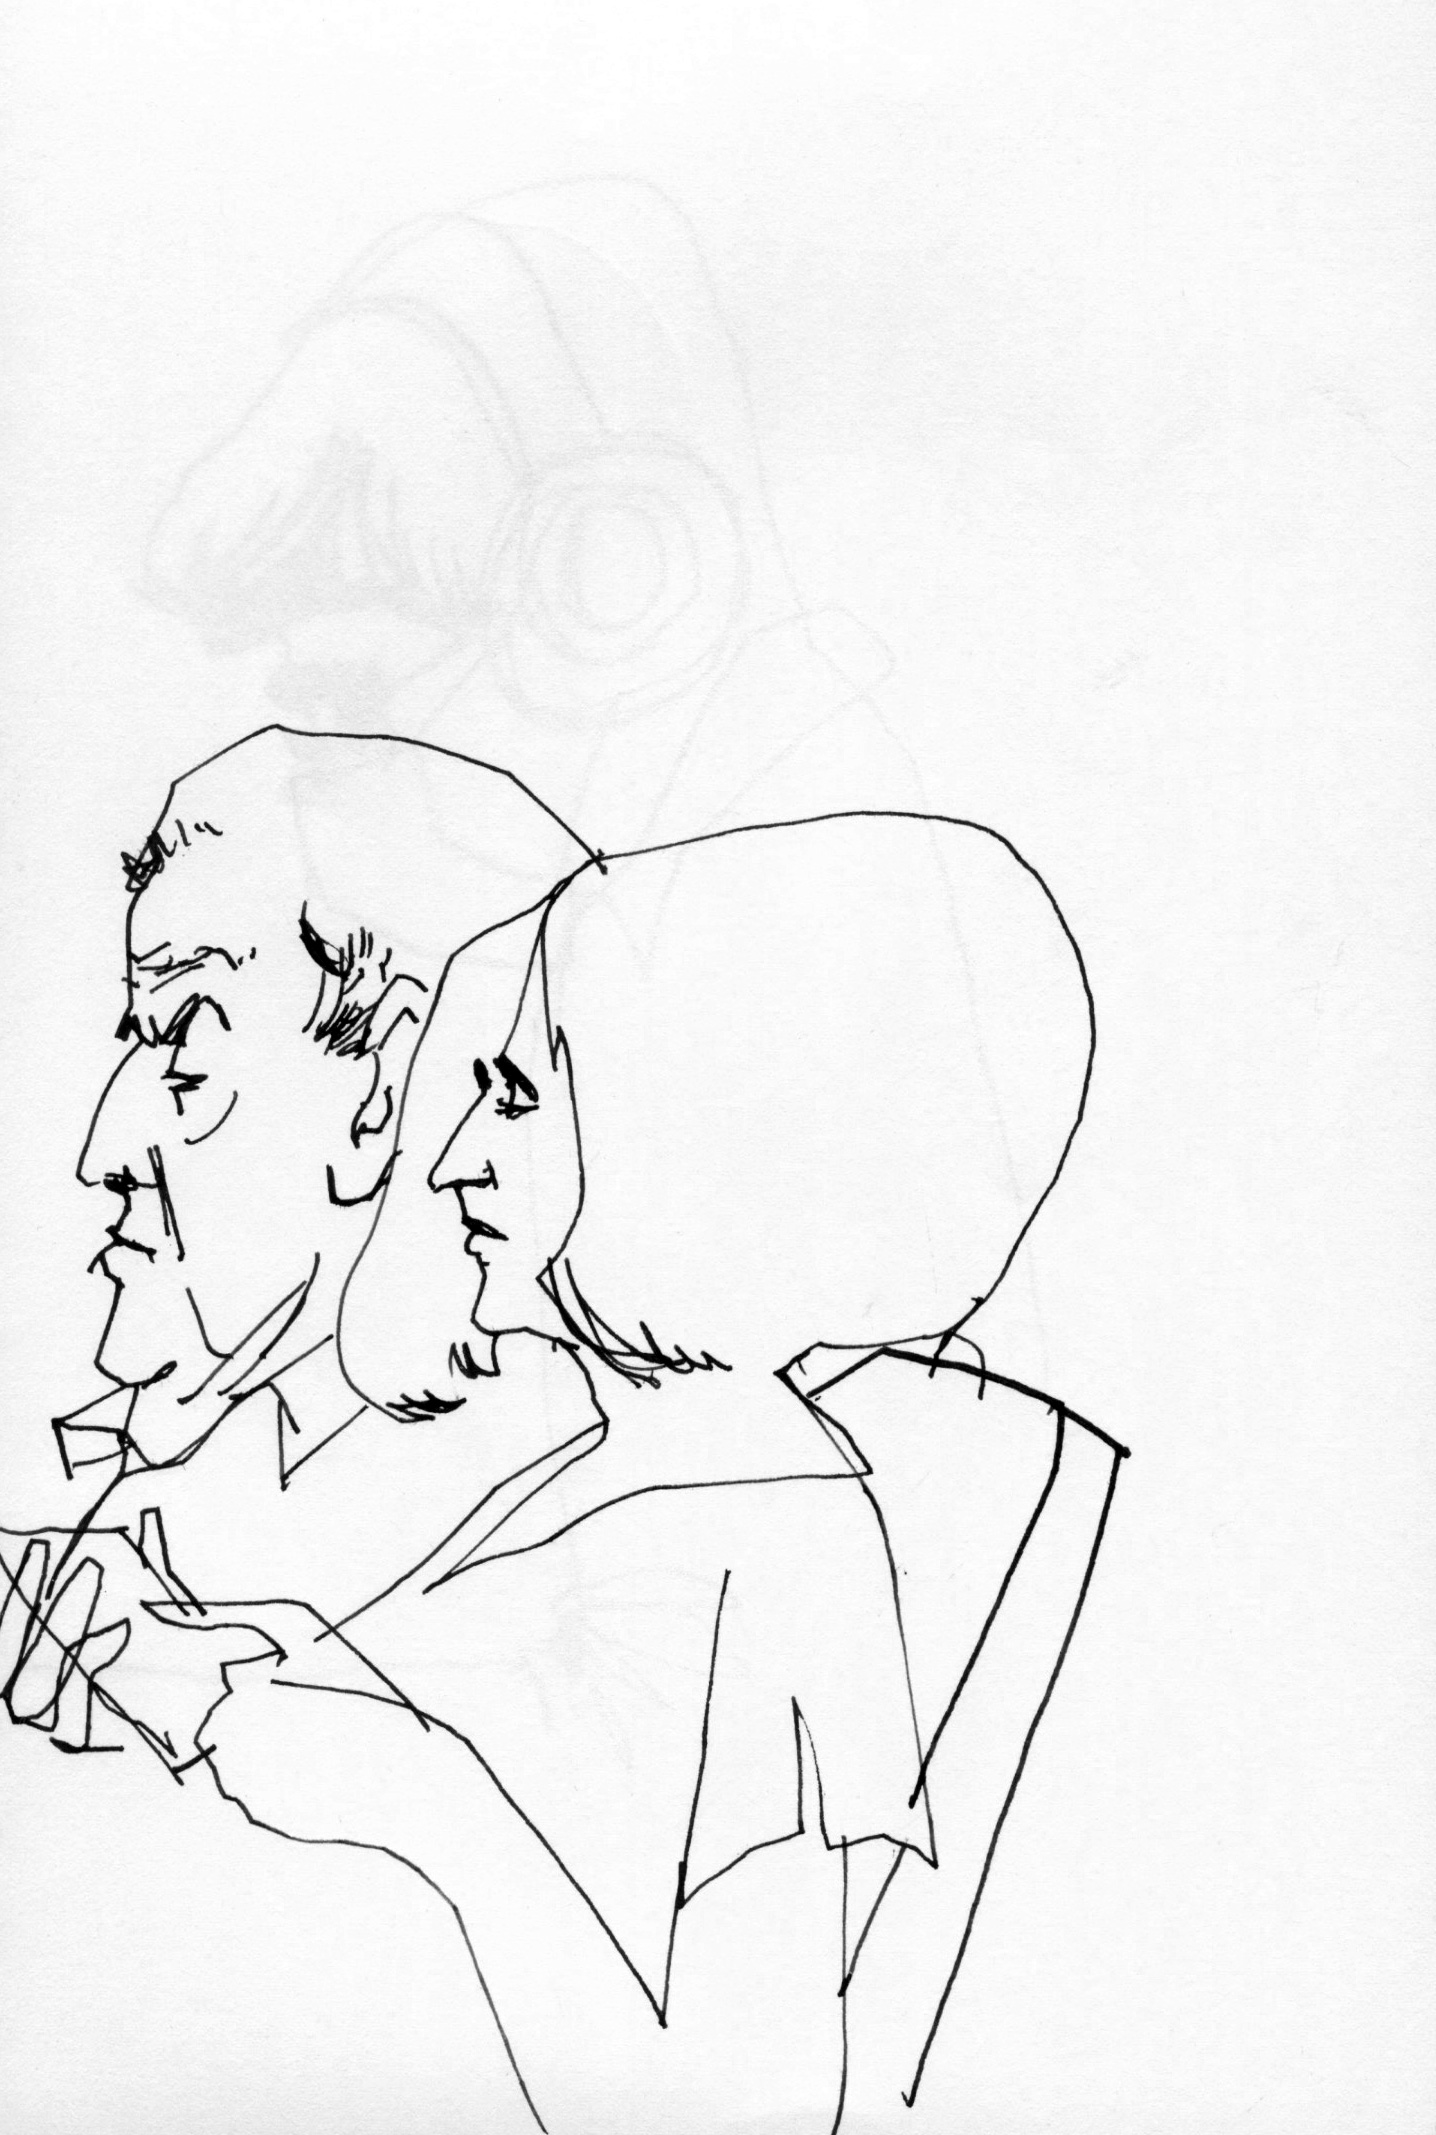 Line drawing of couple at the airport